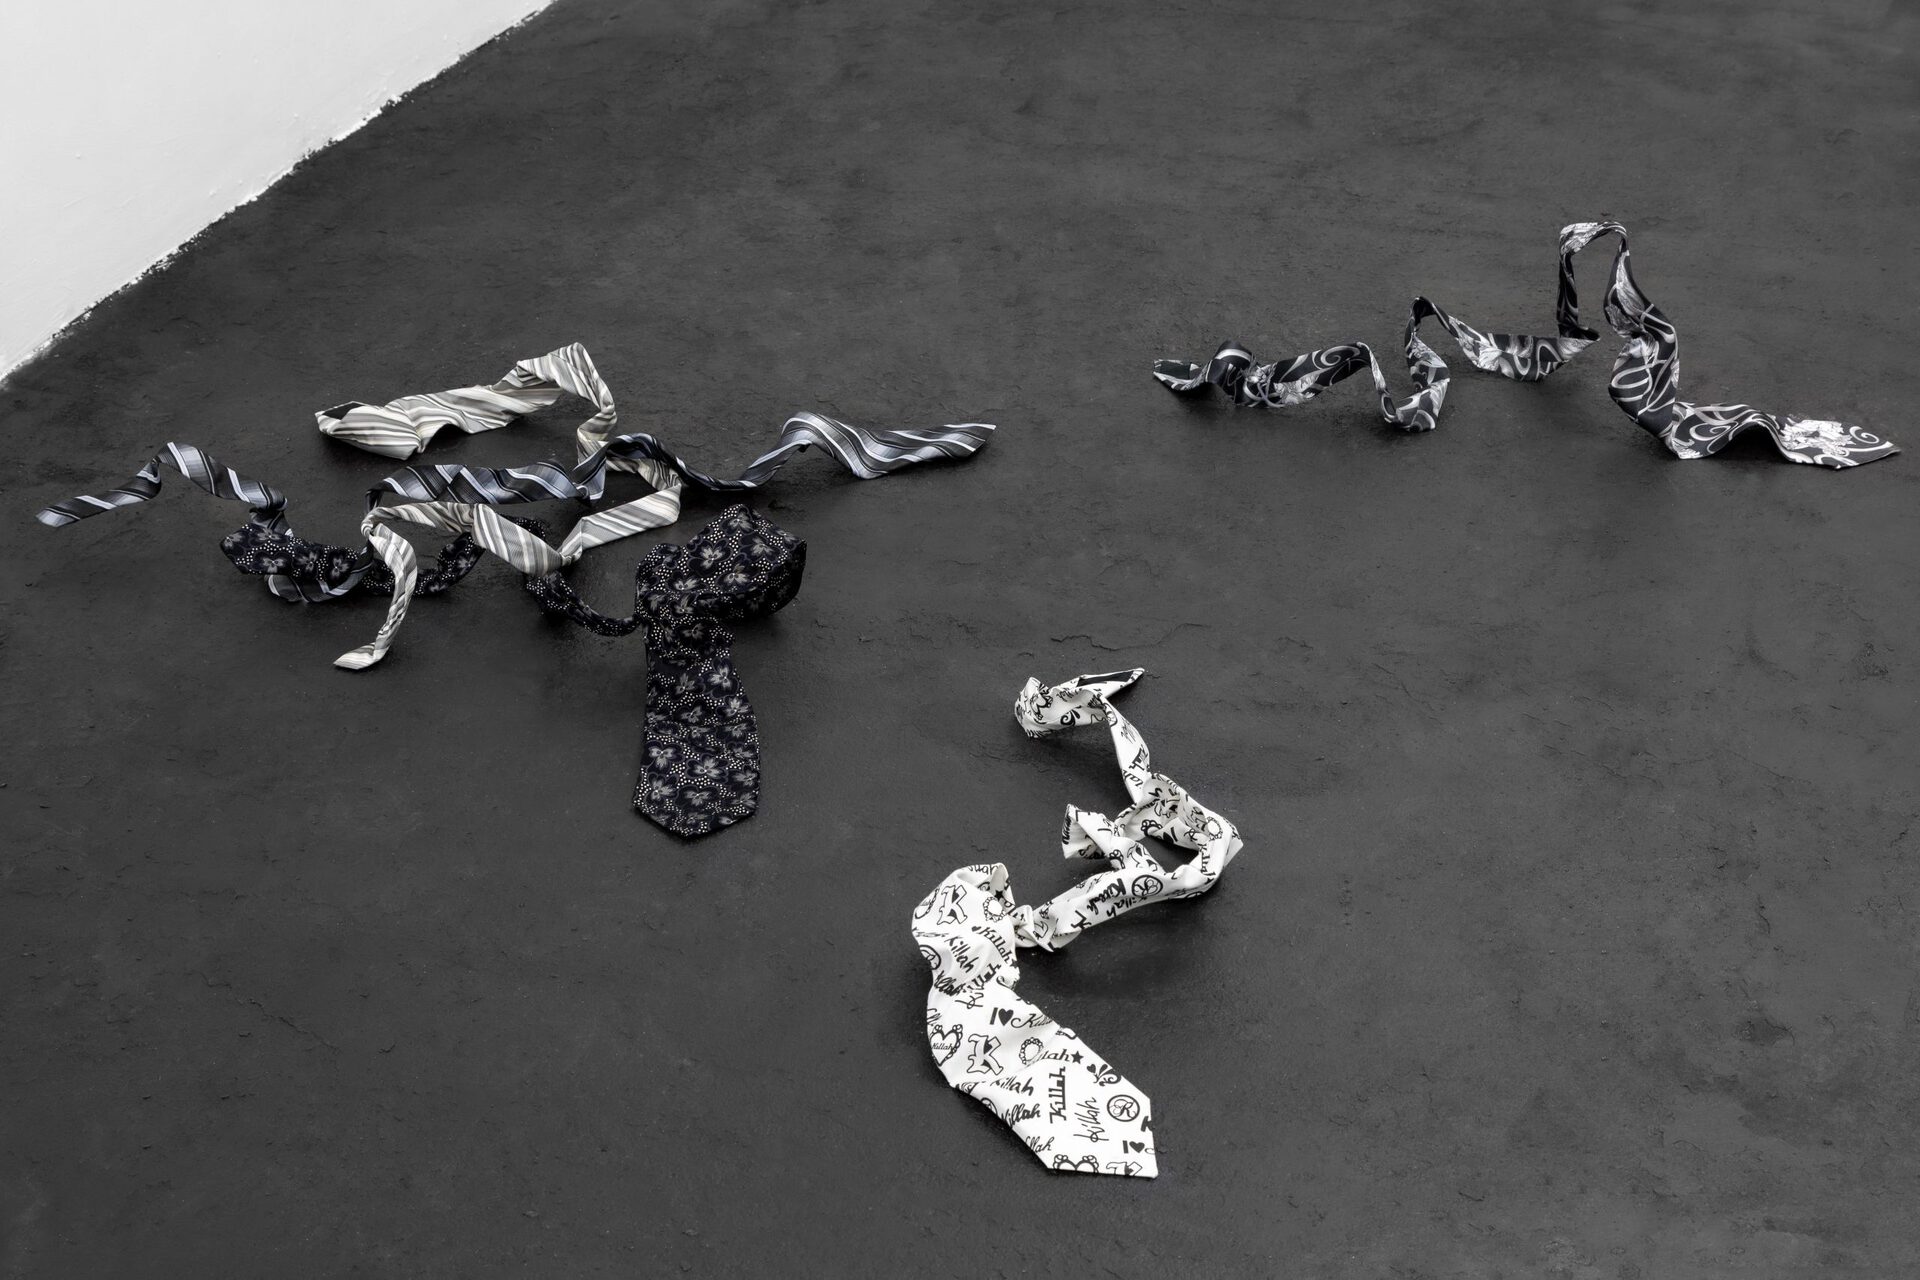 Julian-Jakob Kneer, DECAYDANCE, 2021, Silk and polyester ties, Dimensions variable